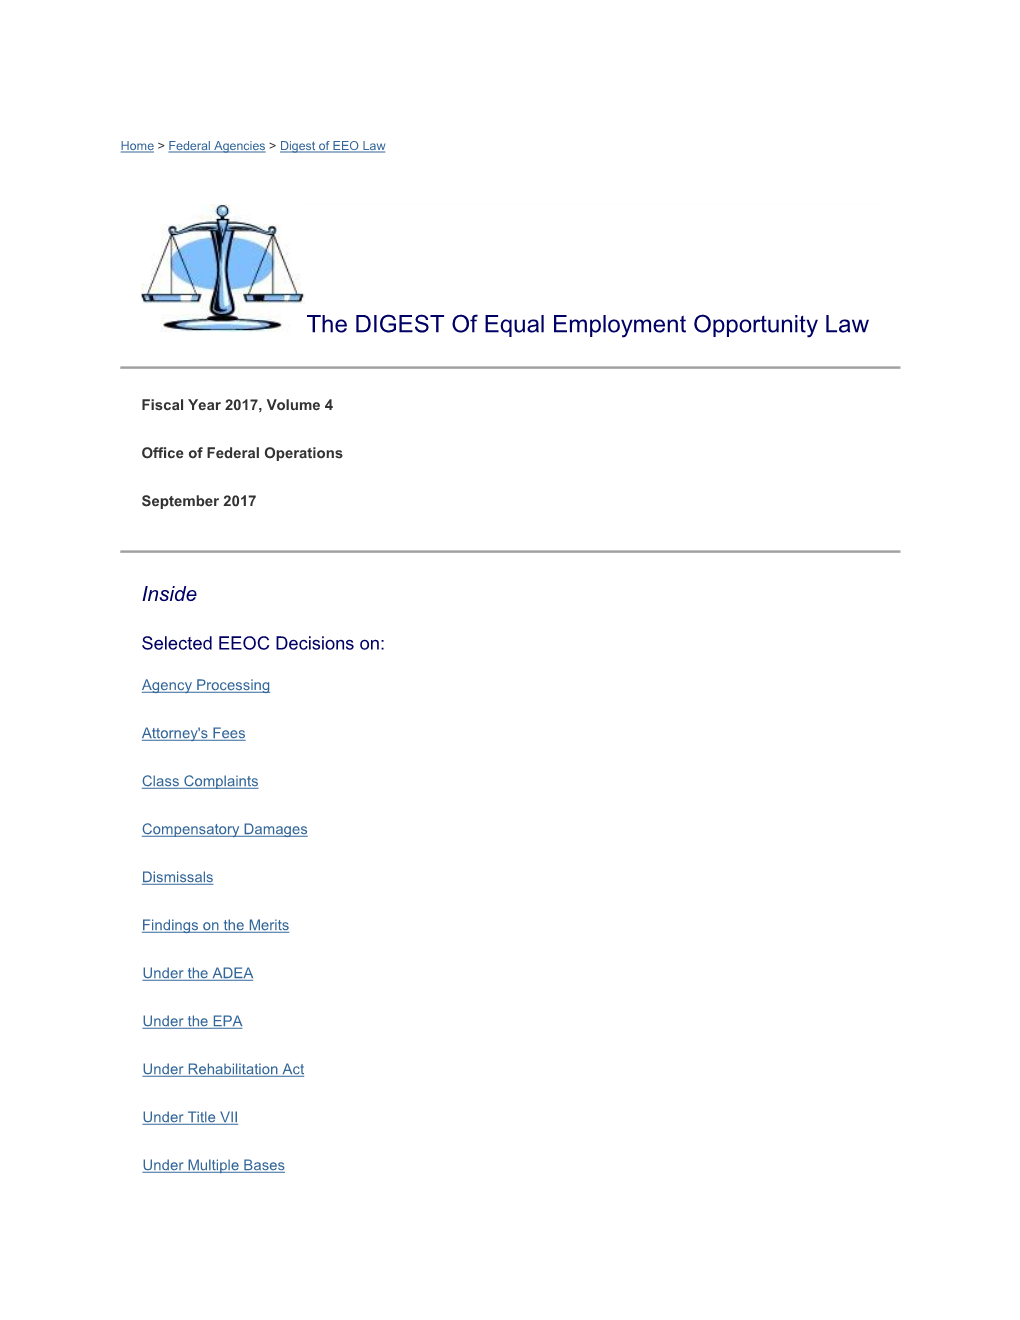 The DIGEST of Equal Employment Opportunity Law